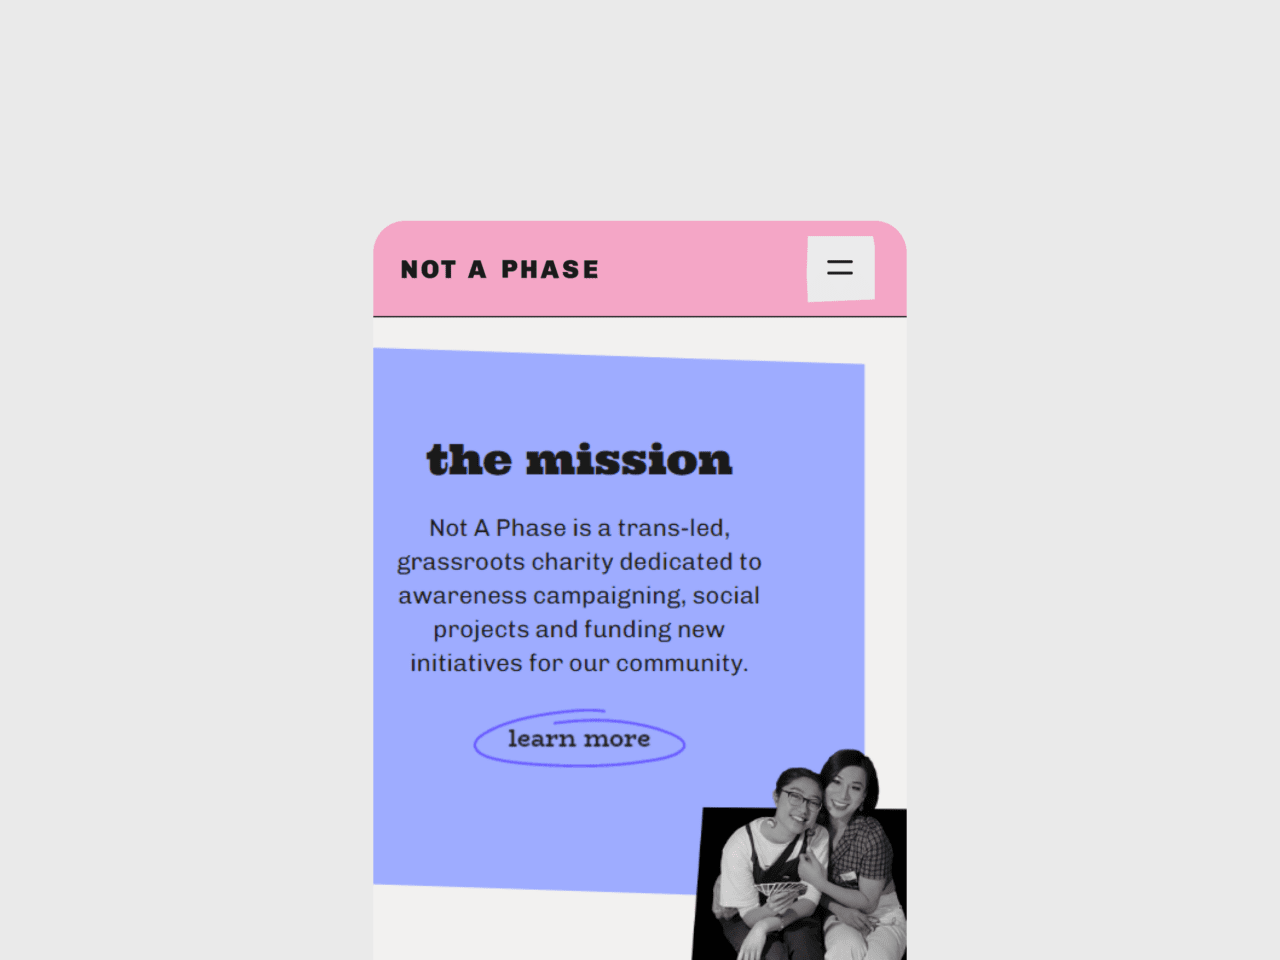 The mission page of Not A Phase website on mobile